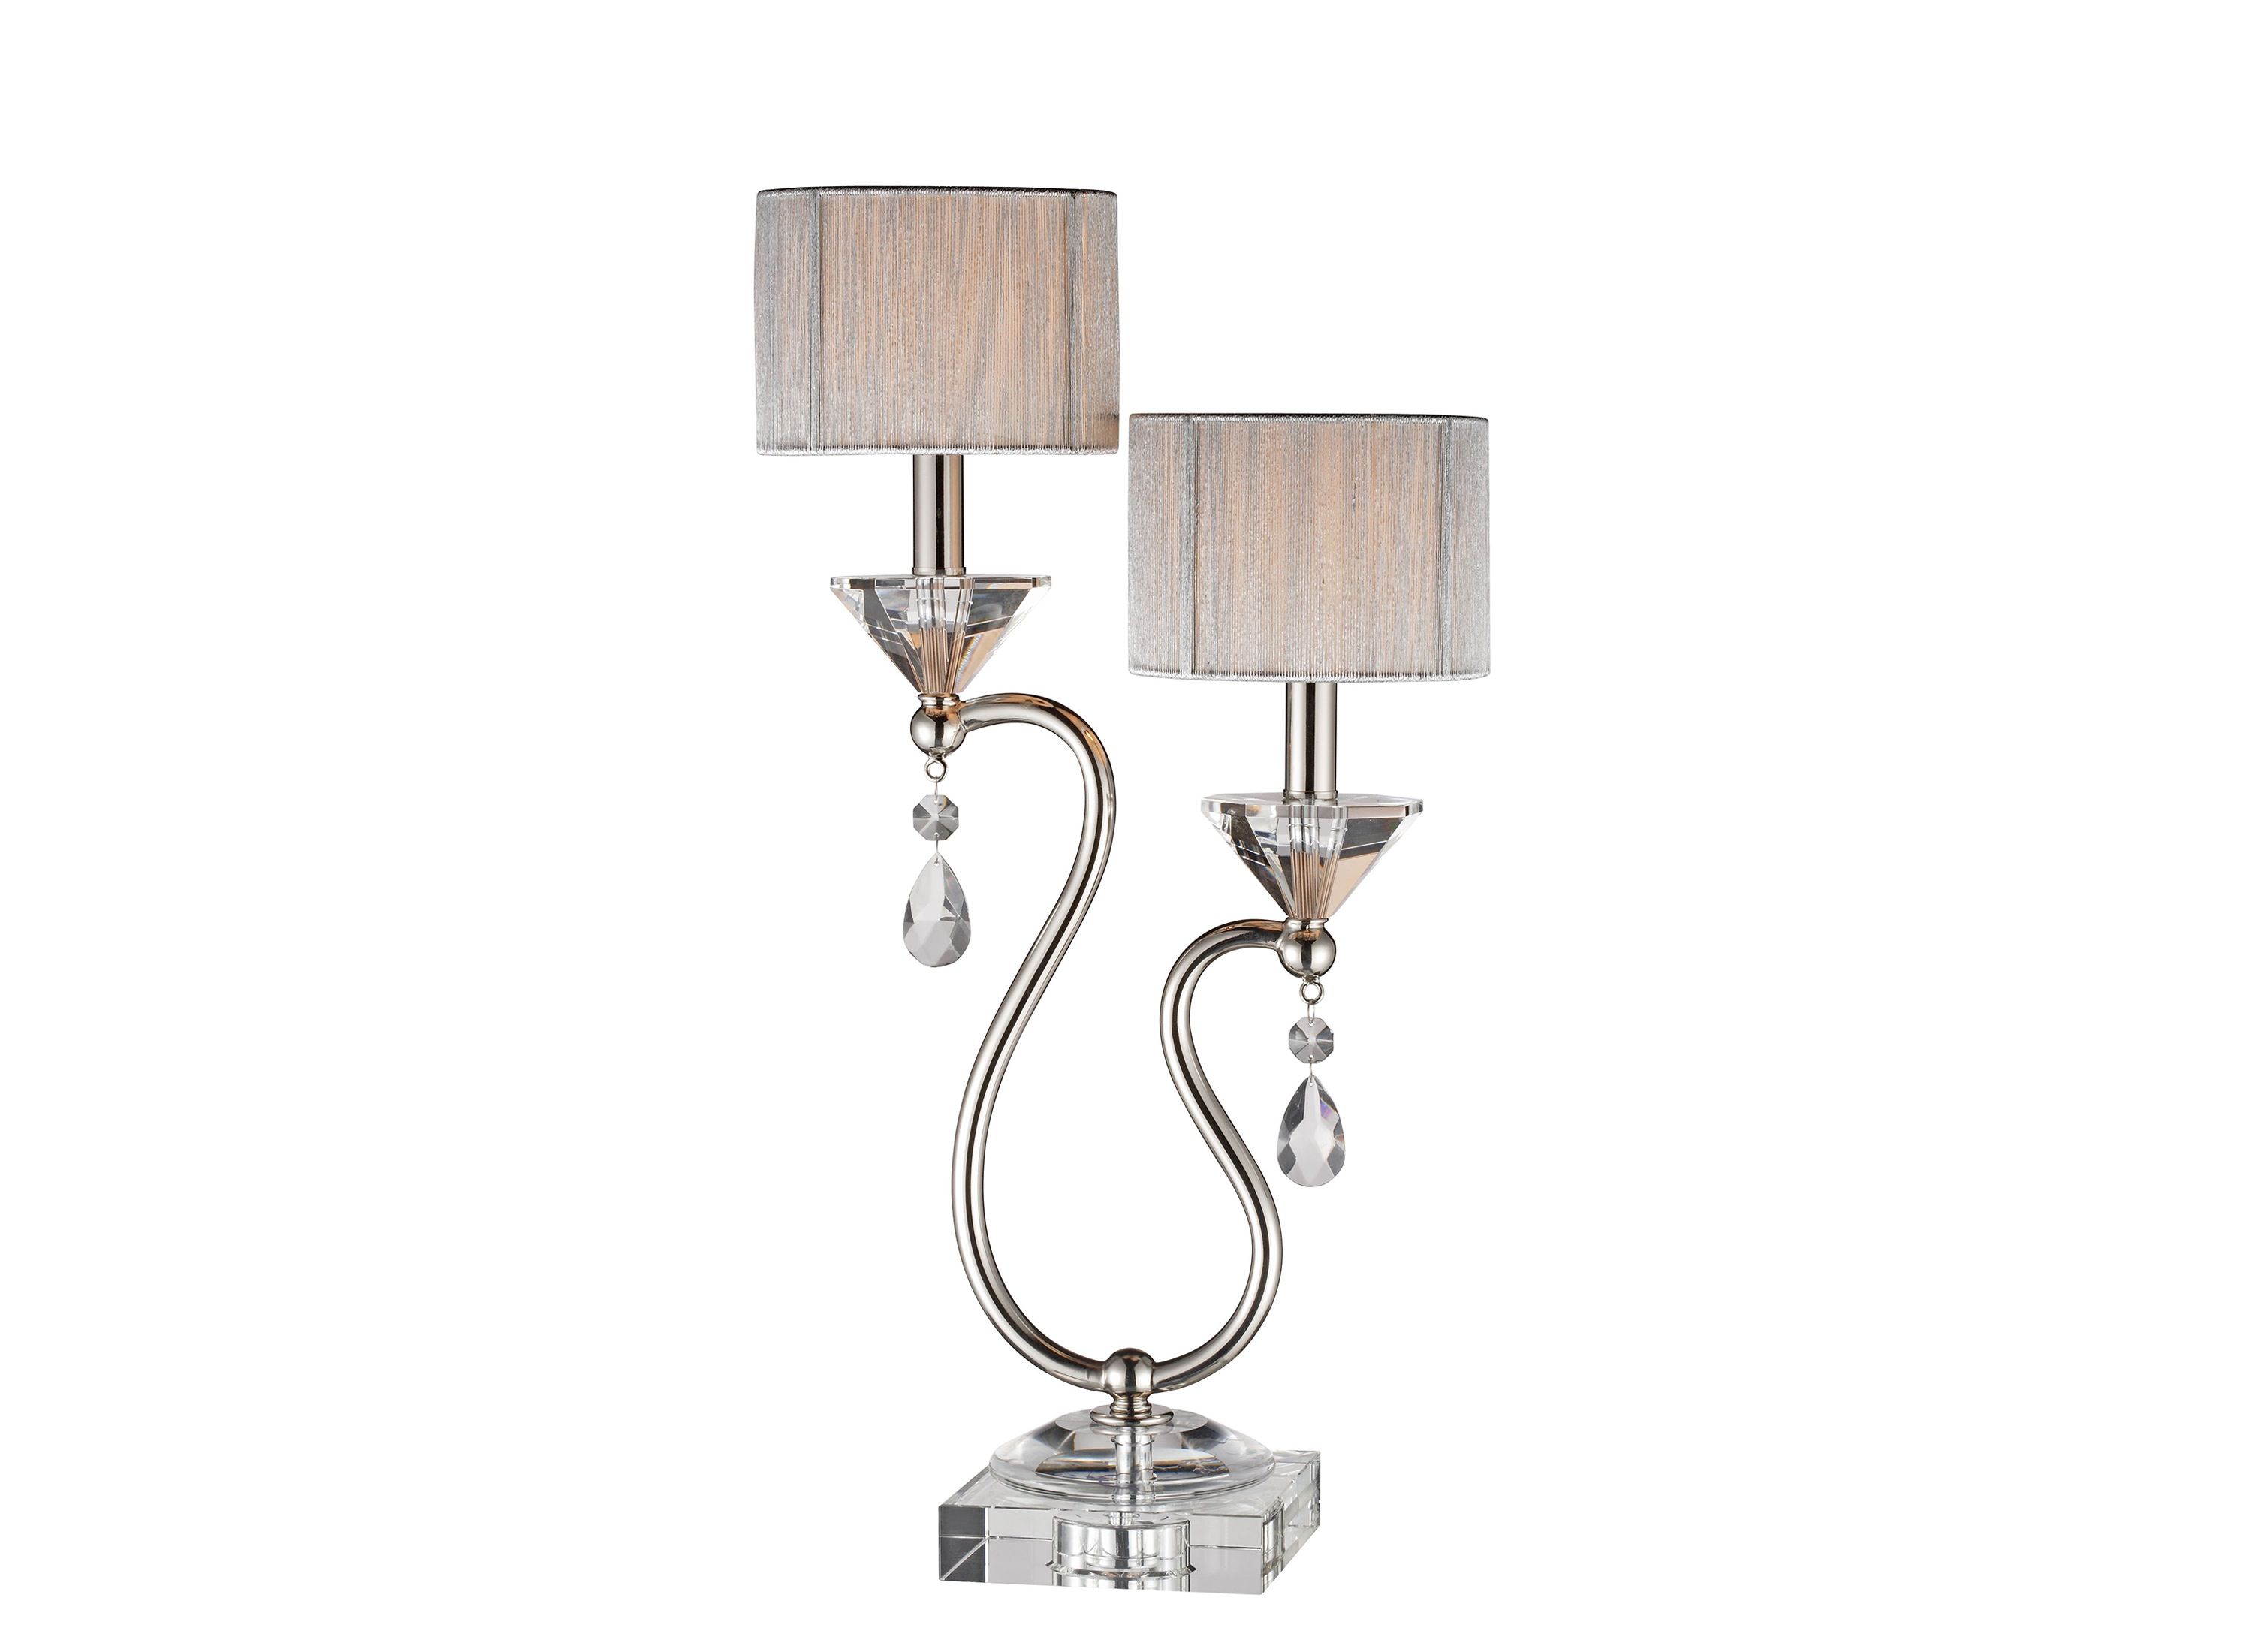 Krystal Table Lamp Raymour Flanigan, Raymour And Flanigan Table Lamps